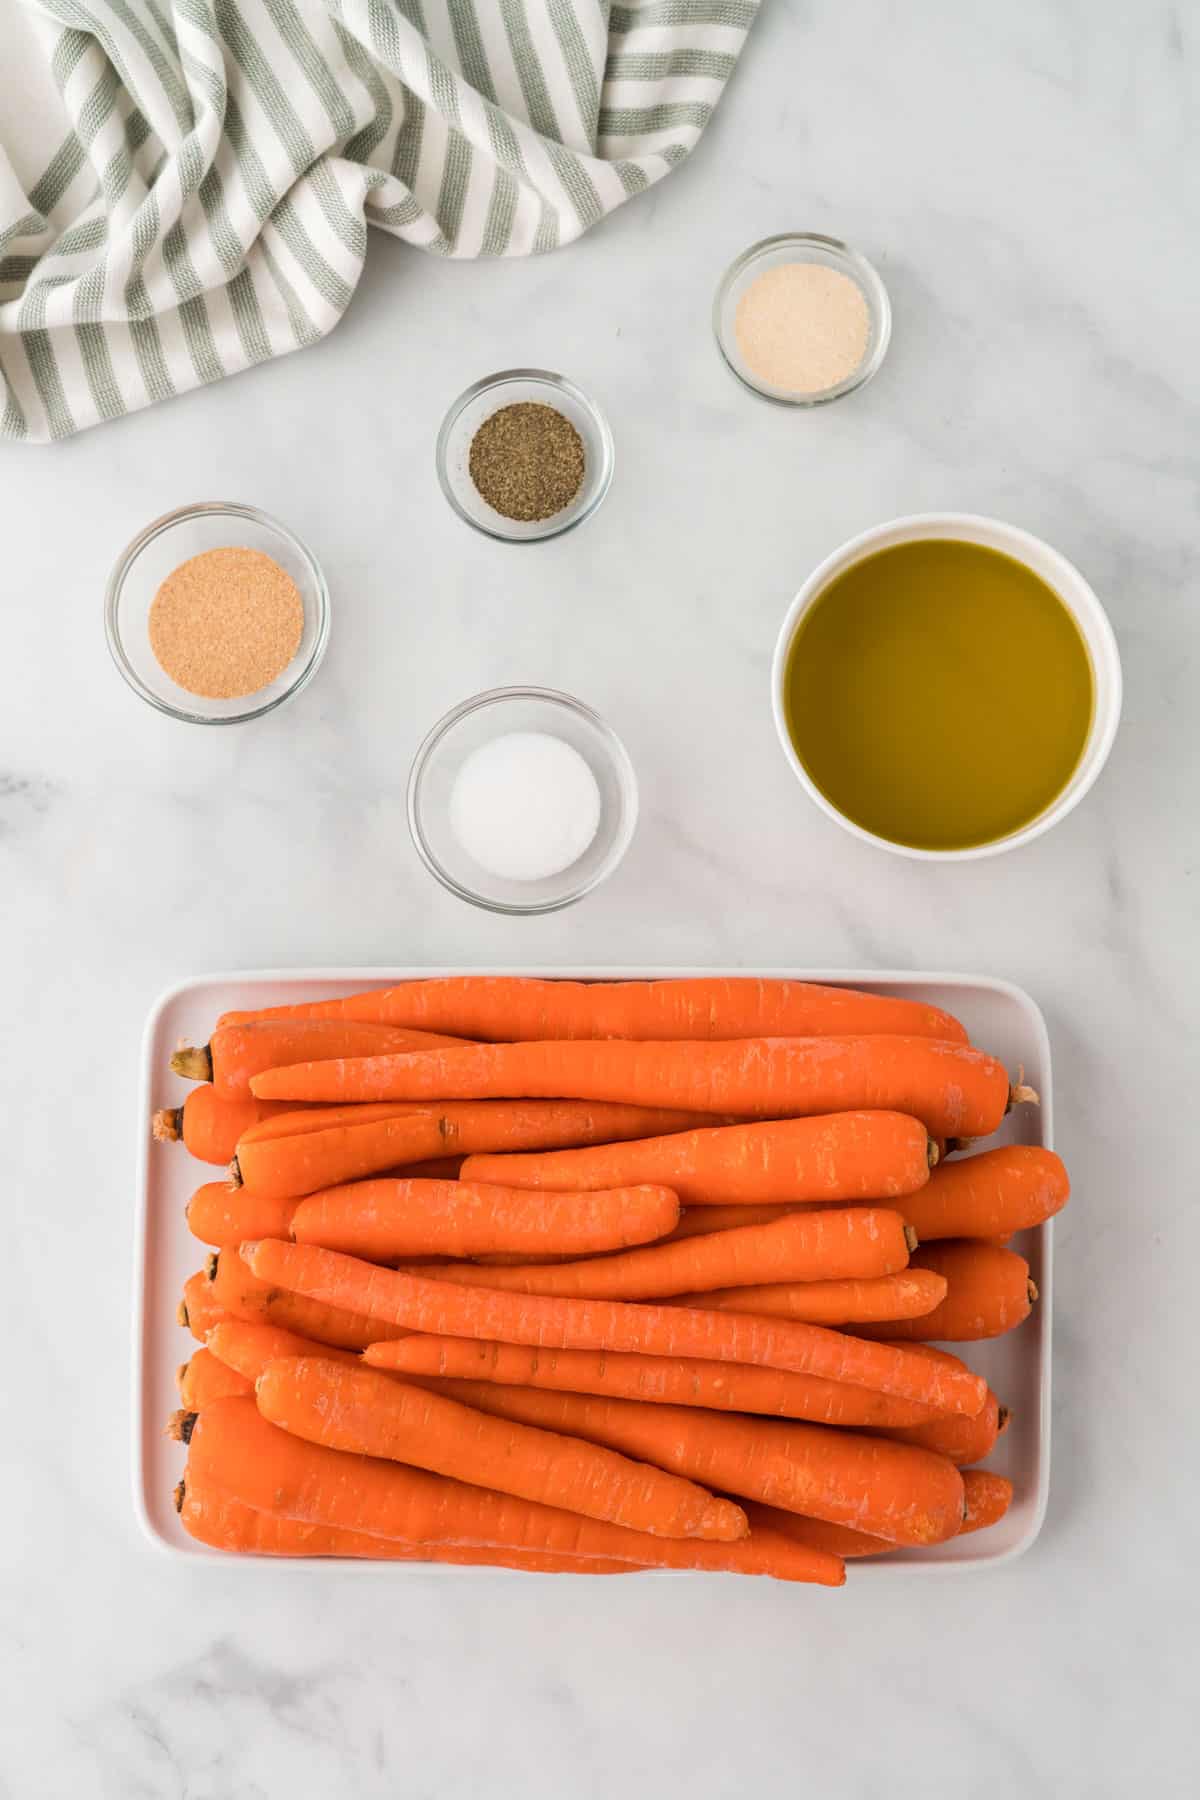 ingredients to make roasted carrots